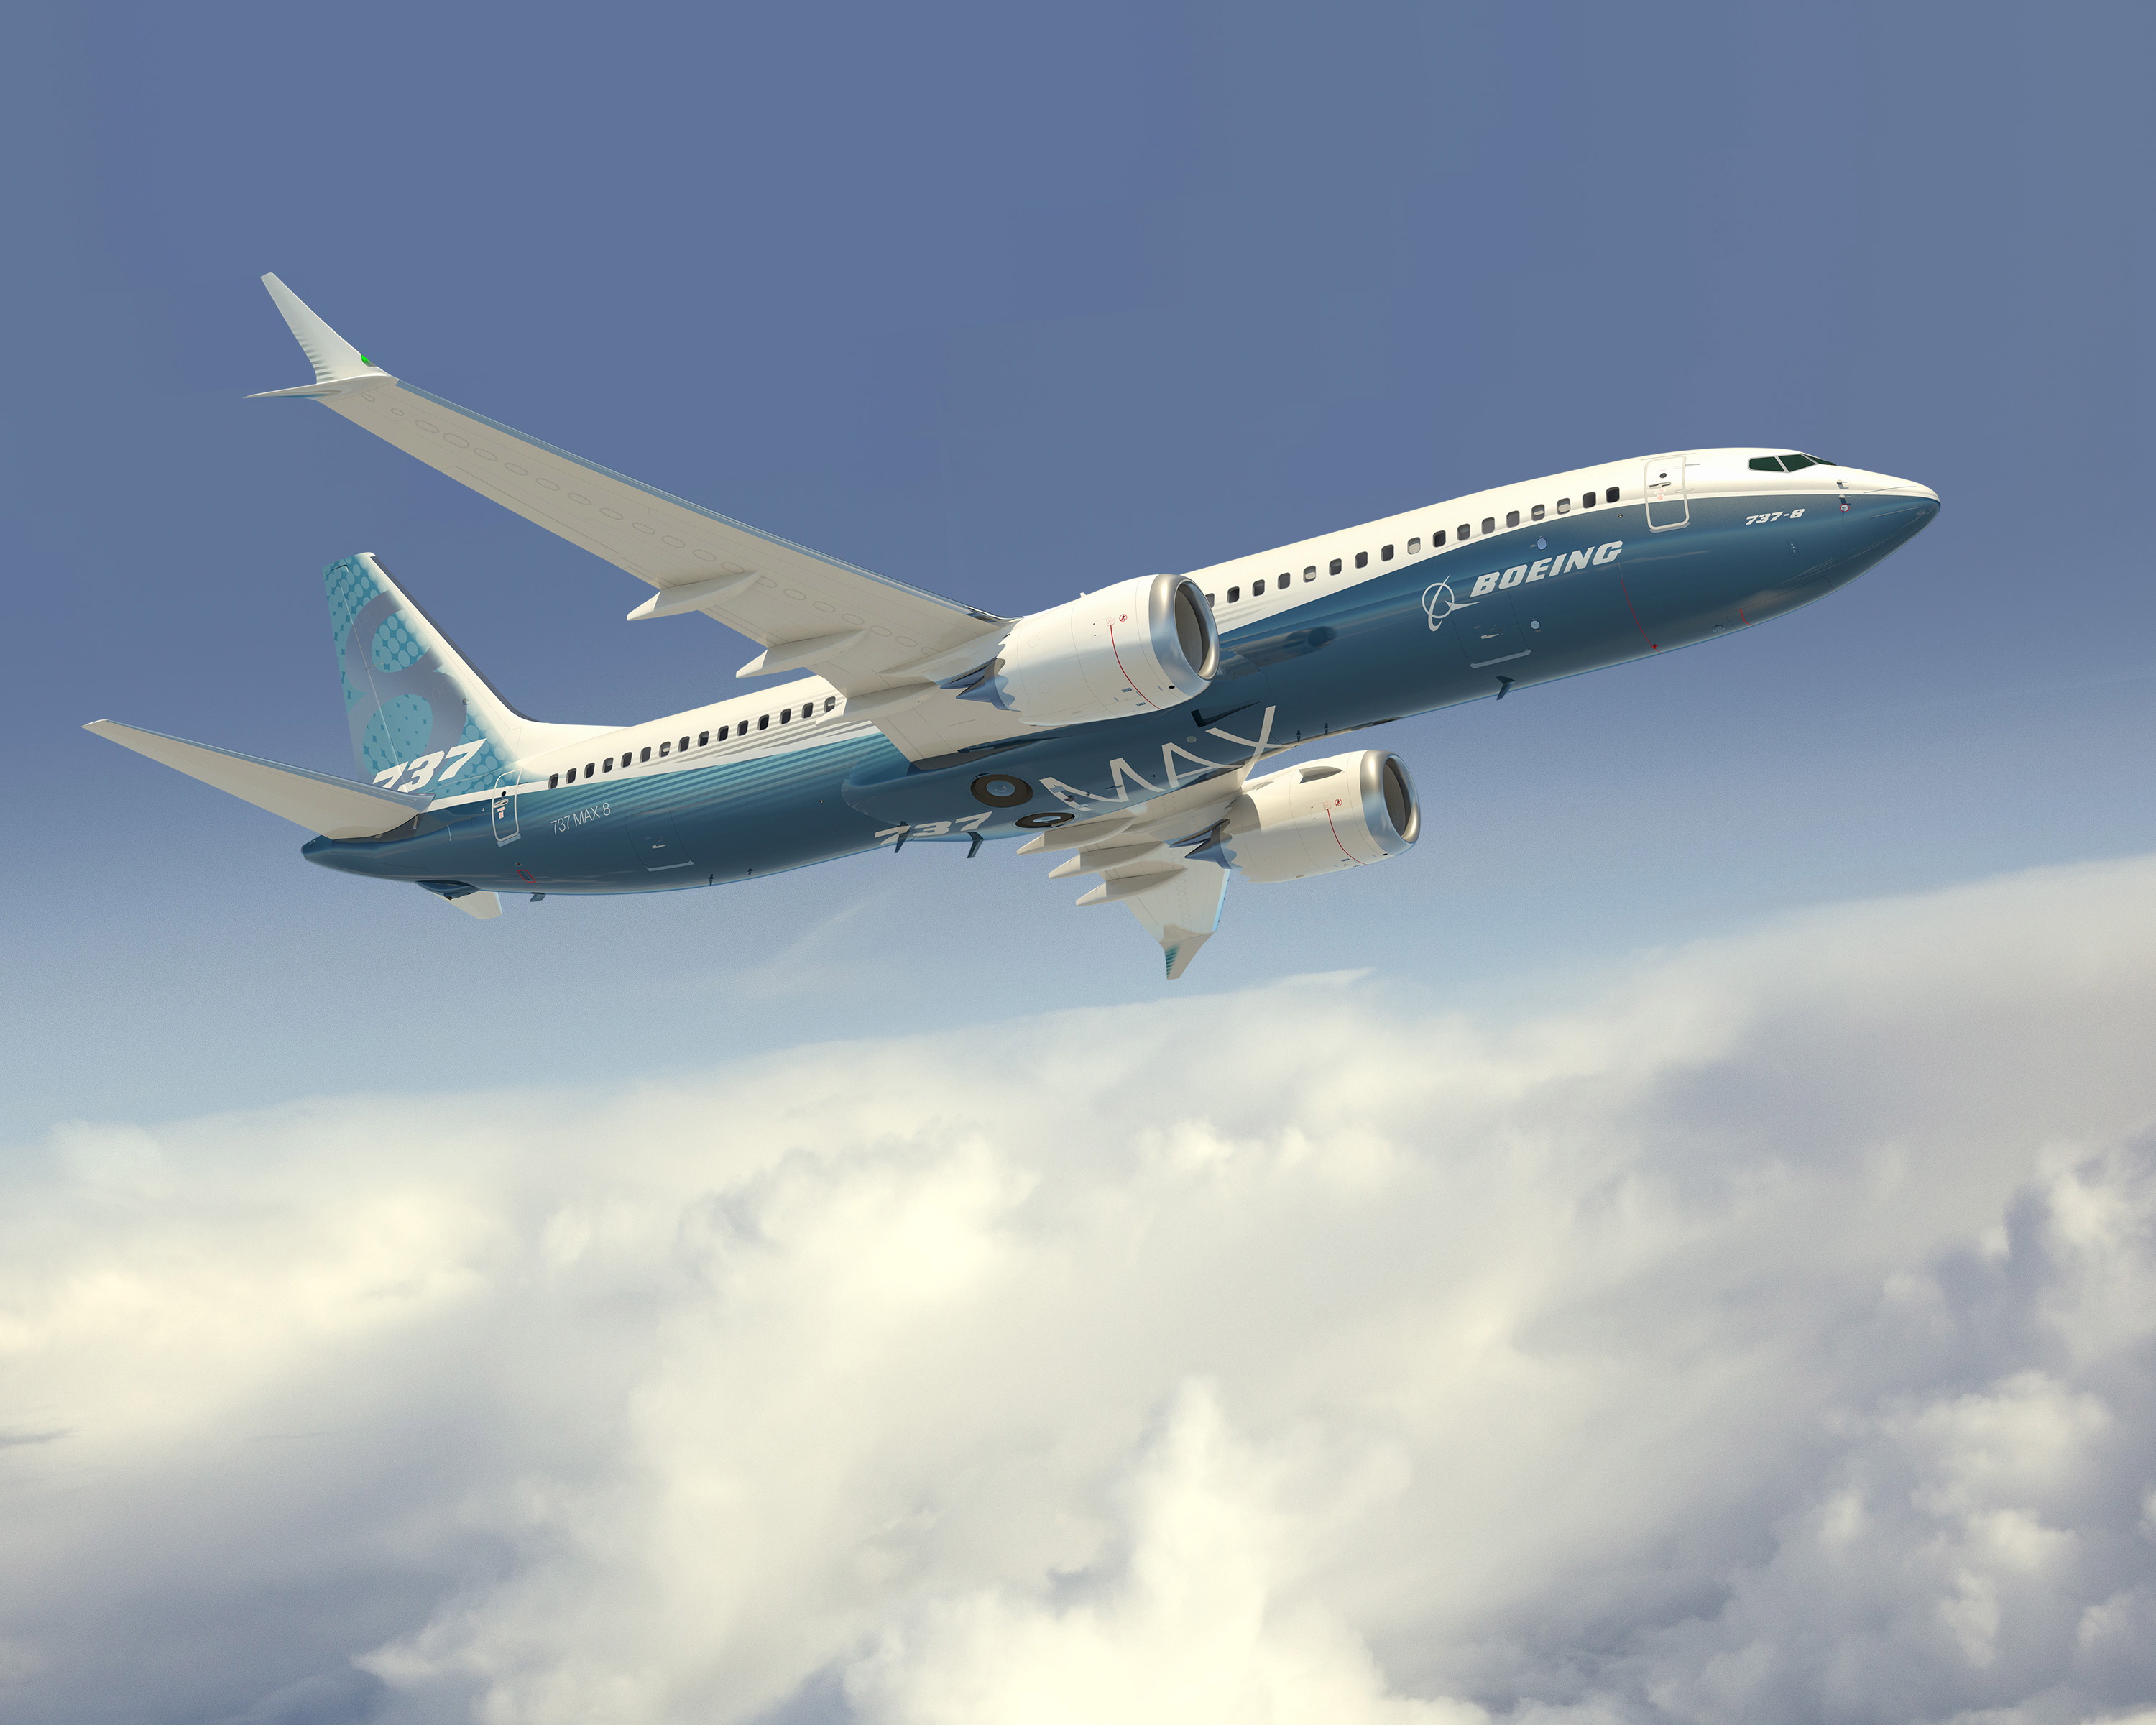 epa07428822 A handout artists rendering made available 11 March 2019 by Boeing Company showing a 737 MAX 8 passenger plane in Boeing colours. An Ethiopian Airlines Boeing 737 MAX 8 passenger plane en route to Nairobi, Kenya, crashed near Bishoftu, some 50km outside of the capital Addis Ababa, Ethiopia, on 10 March 2019. All passengers onboard the scheduled flight ET 302 carrying 149 passengers and 8 crew members, have died, the airlines said. Boeing has sent a crew to the accident site to help in investigations. Some other airlines have grounded their planes of the same type.  EPA/BOEING HANDOUT  HANDOUT EDITORIAL USE ONLY/NO SALES